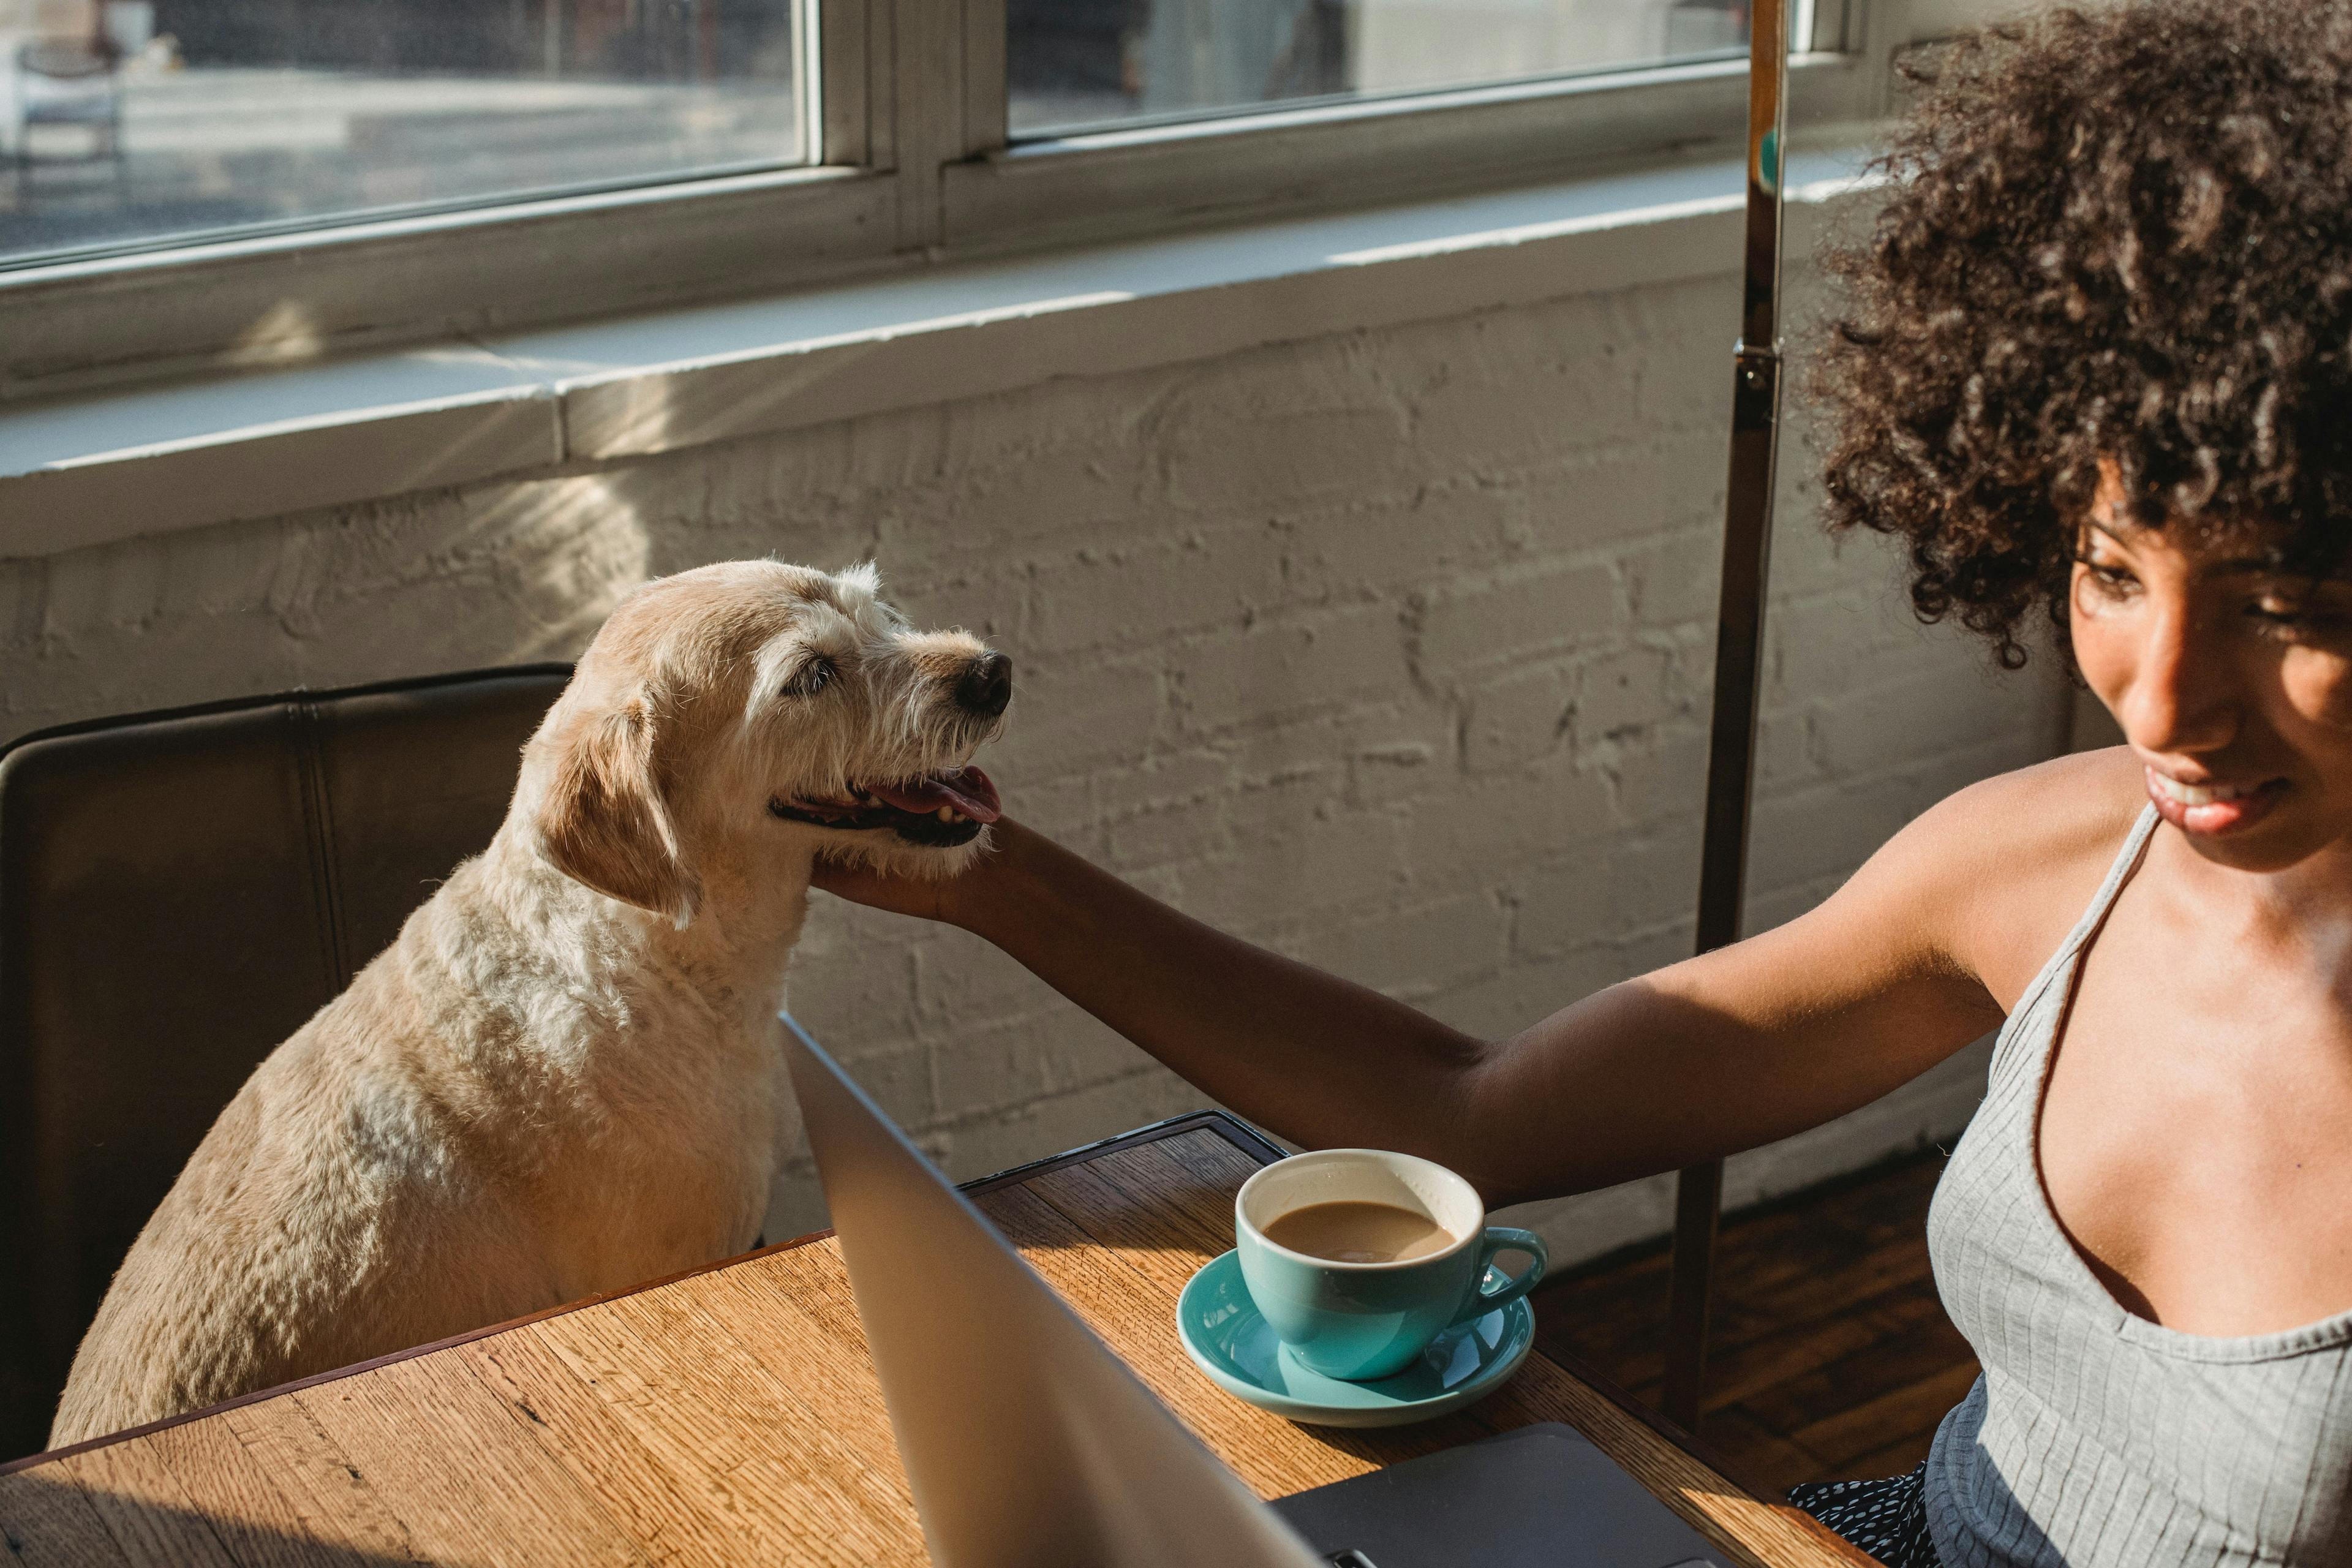 Smiling woman enjoying a sunny workspace with her happy dog beside a cup of coffee and laptop.